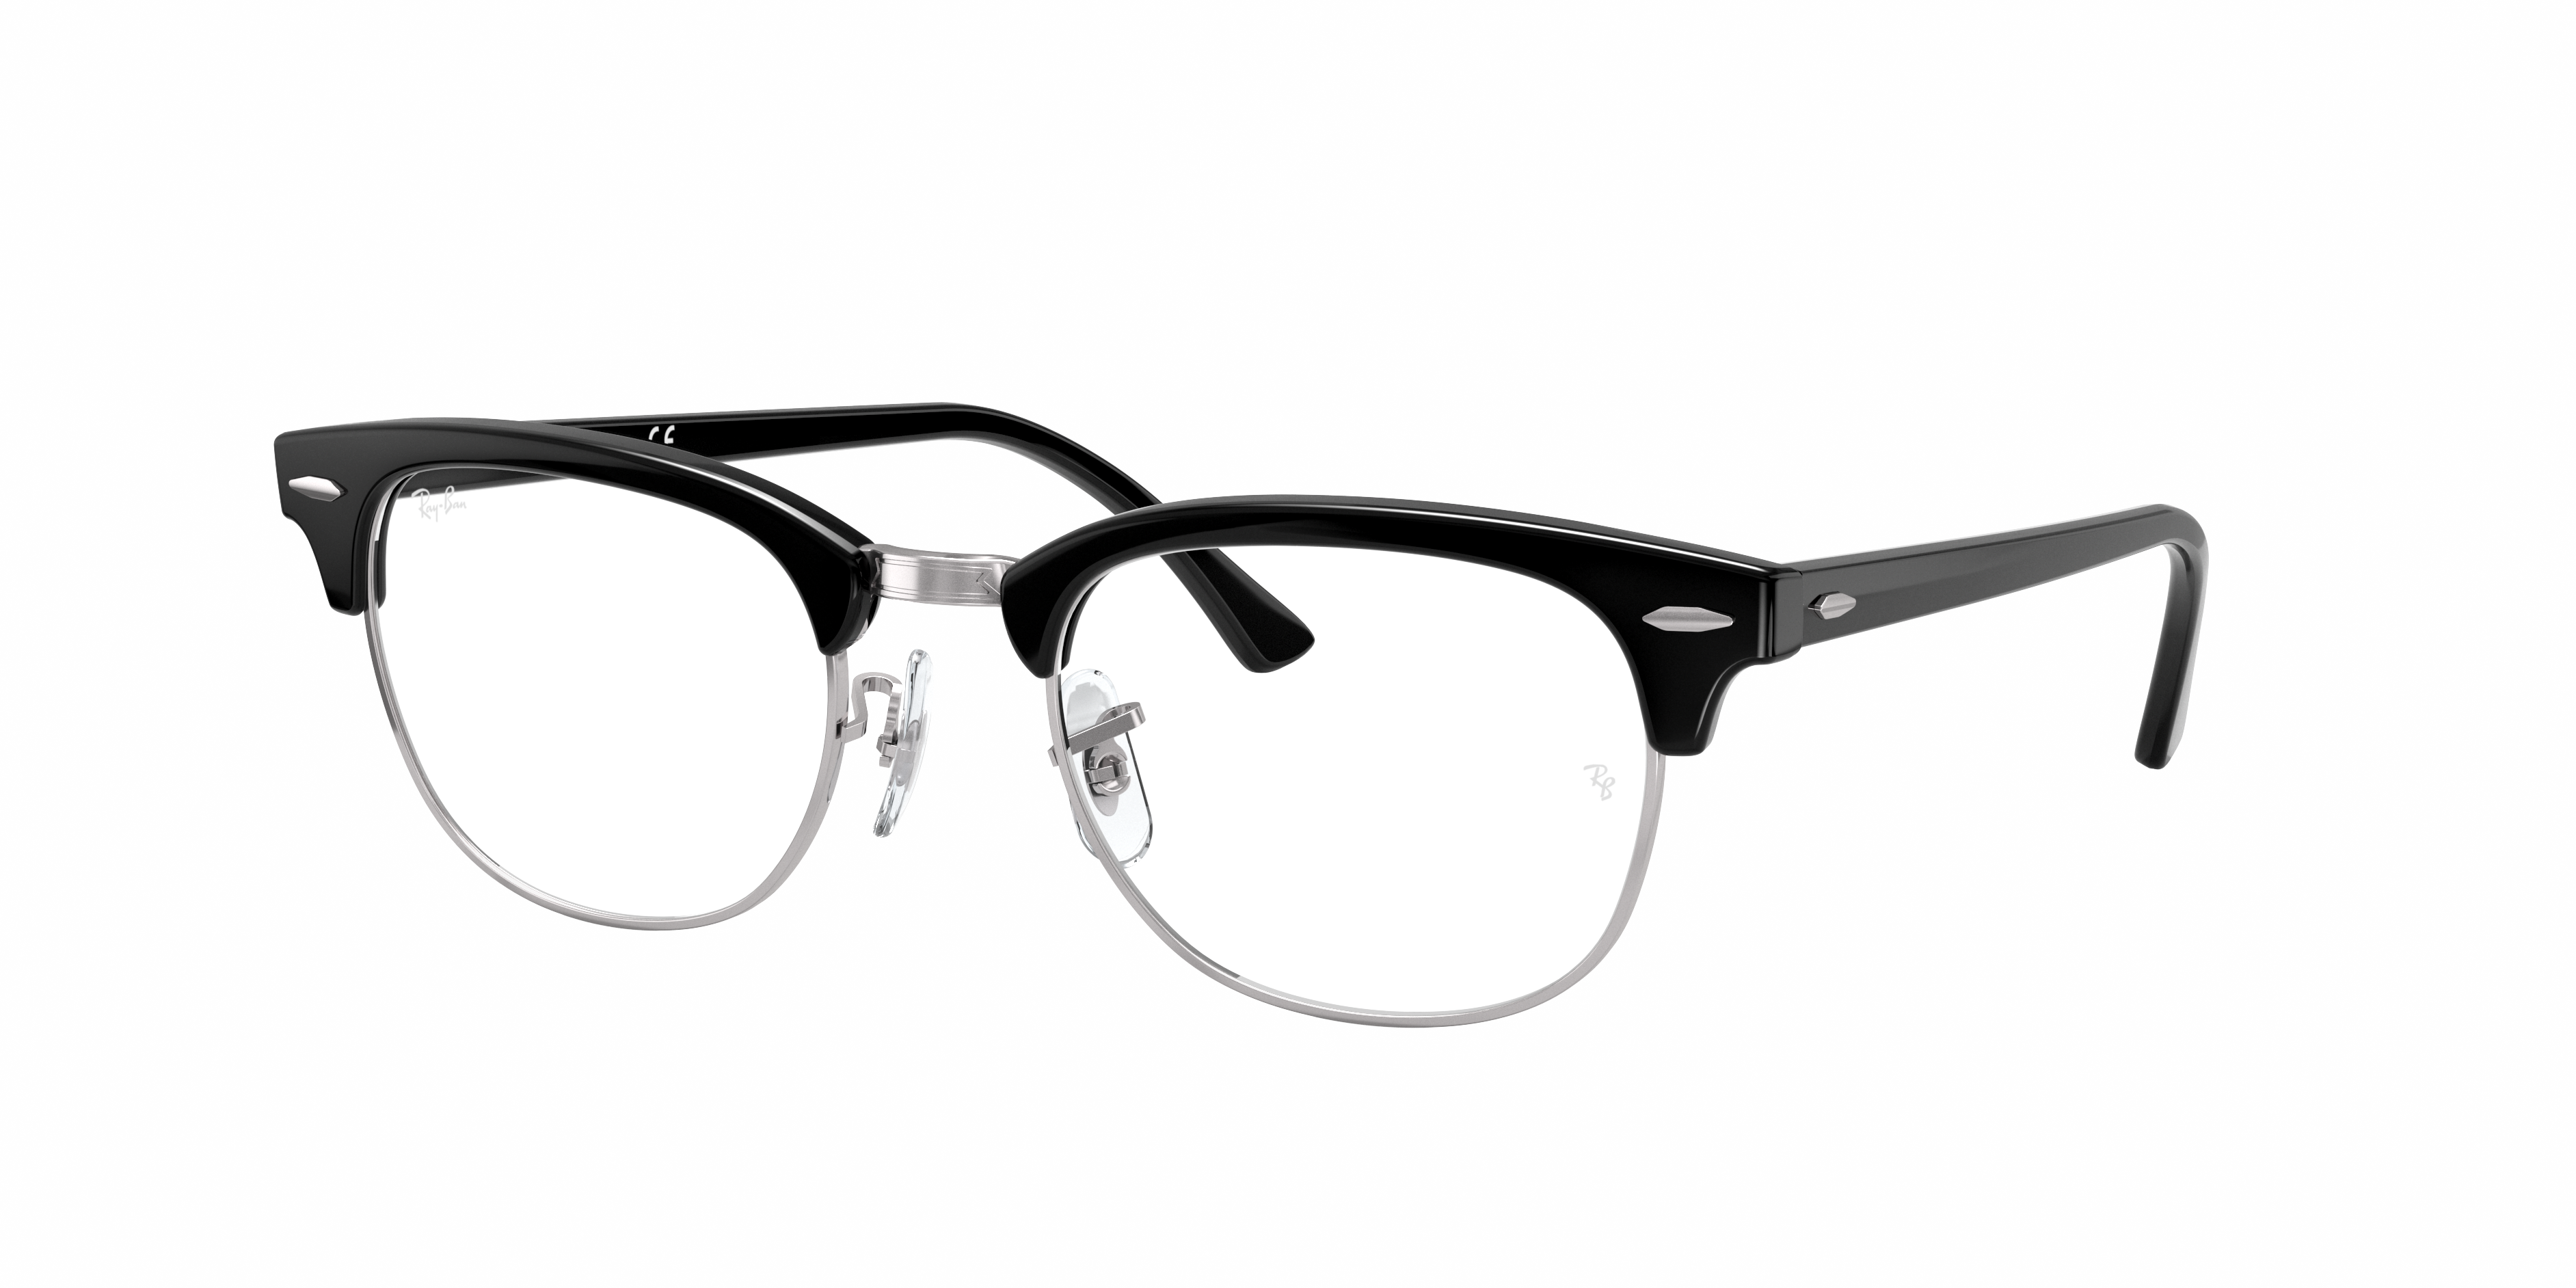 Clubmaster Optics Eyeglasses with Black On Silver Frame | Ray-Ban®